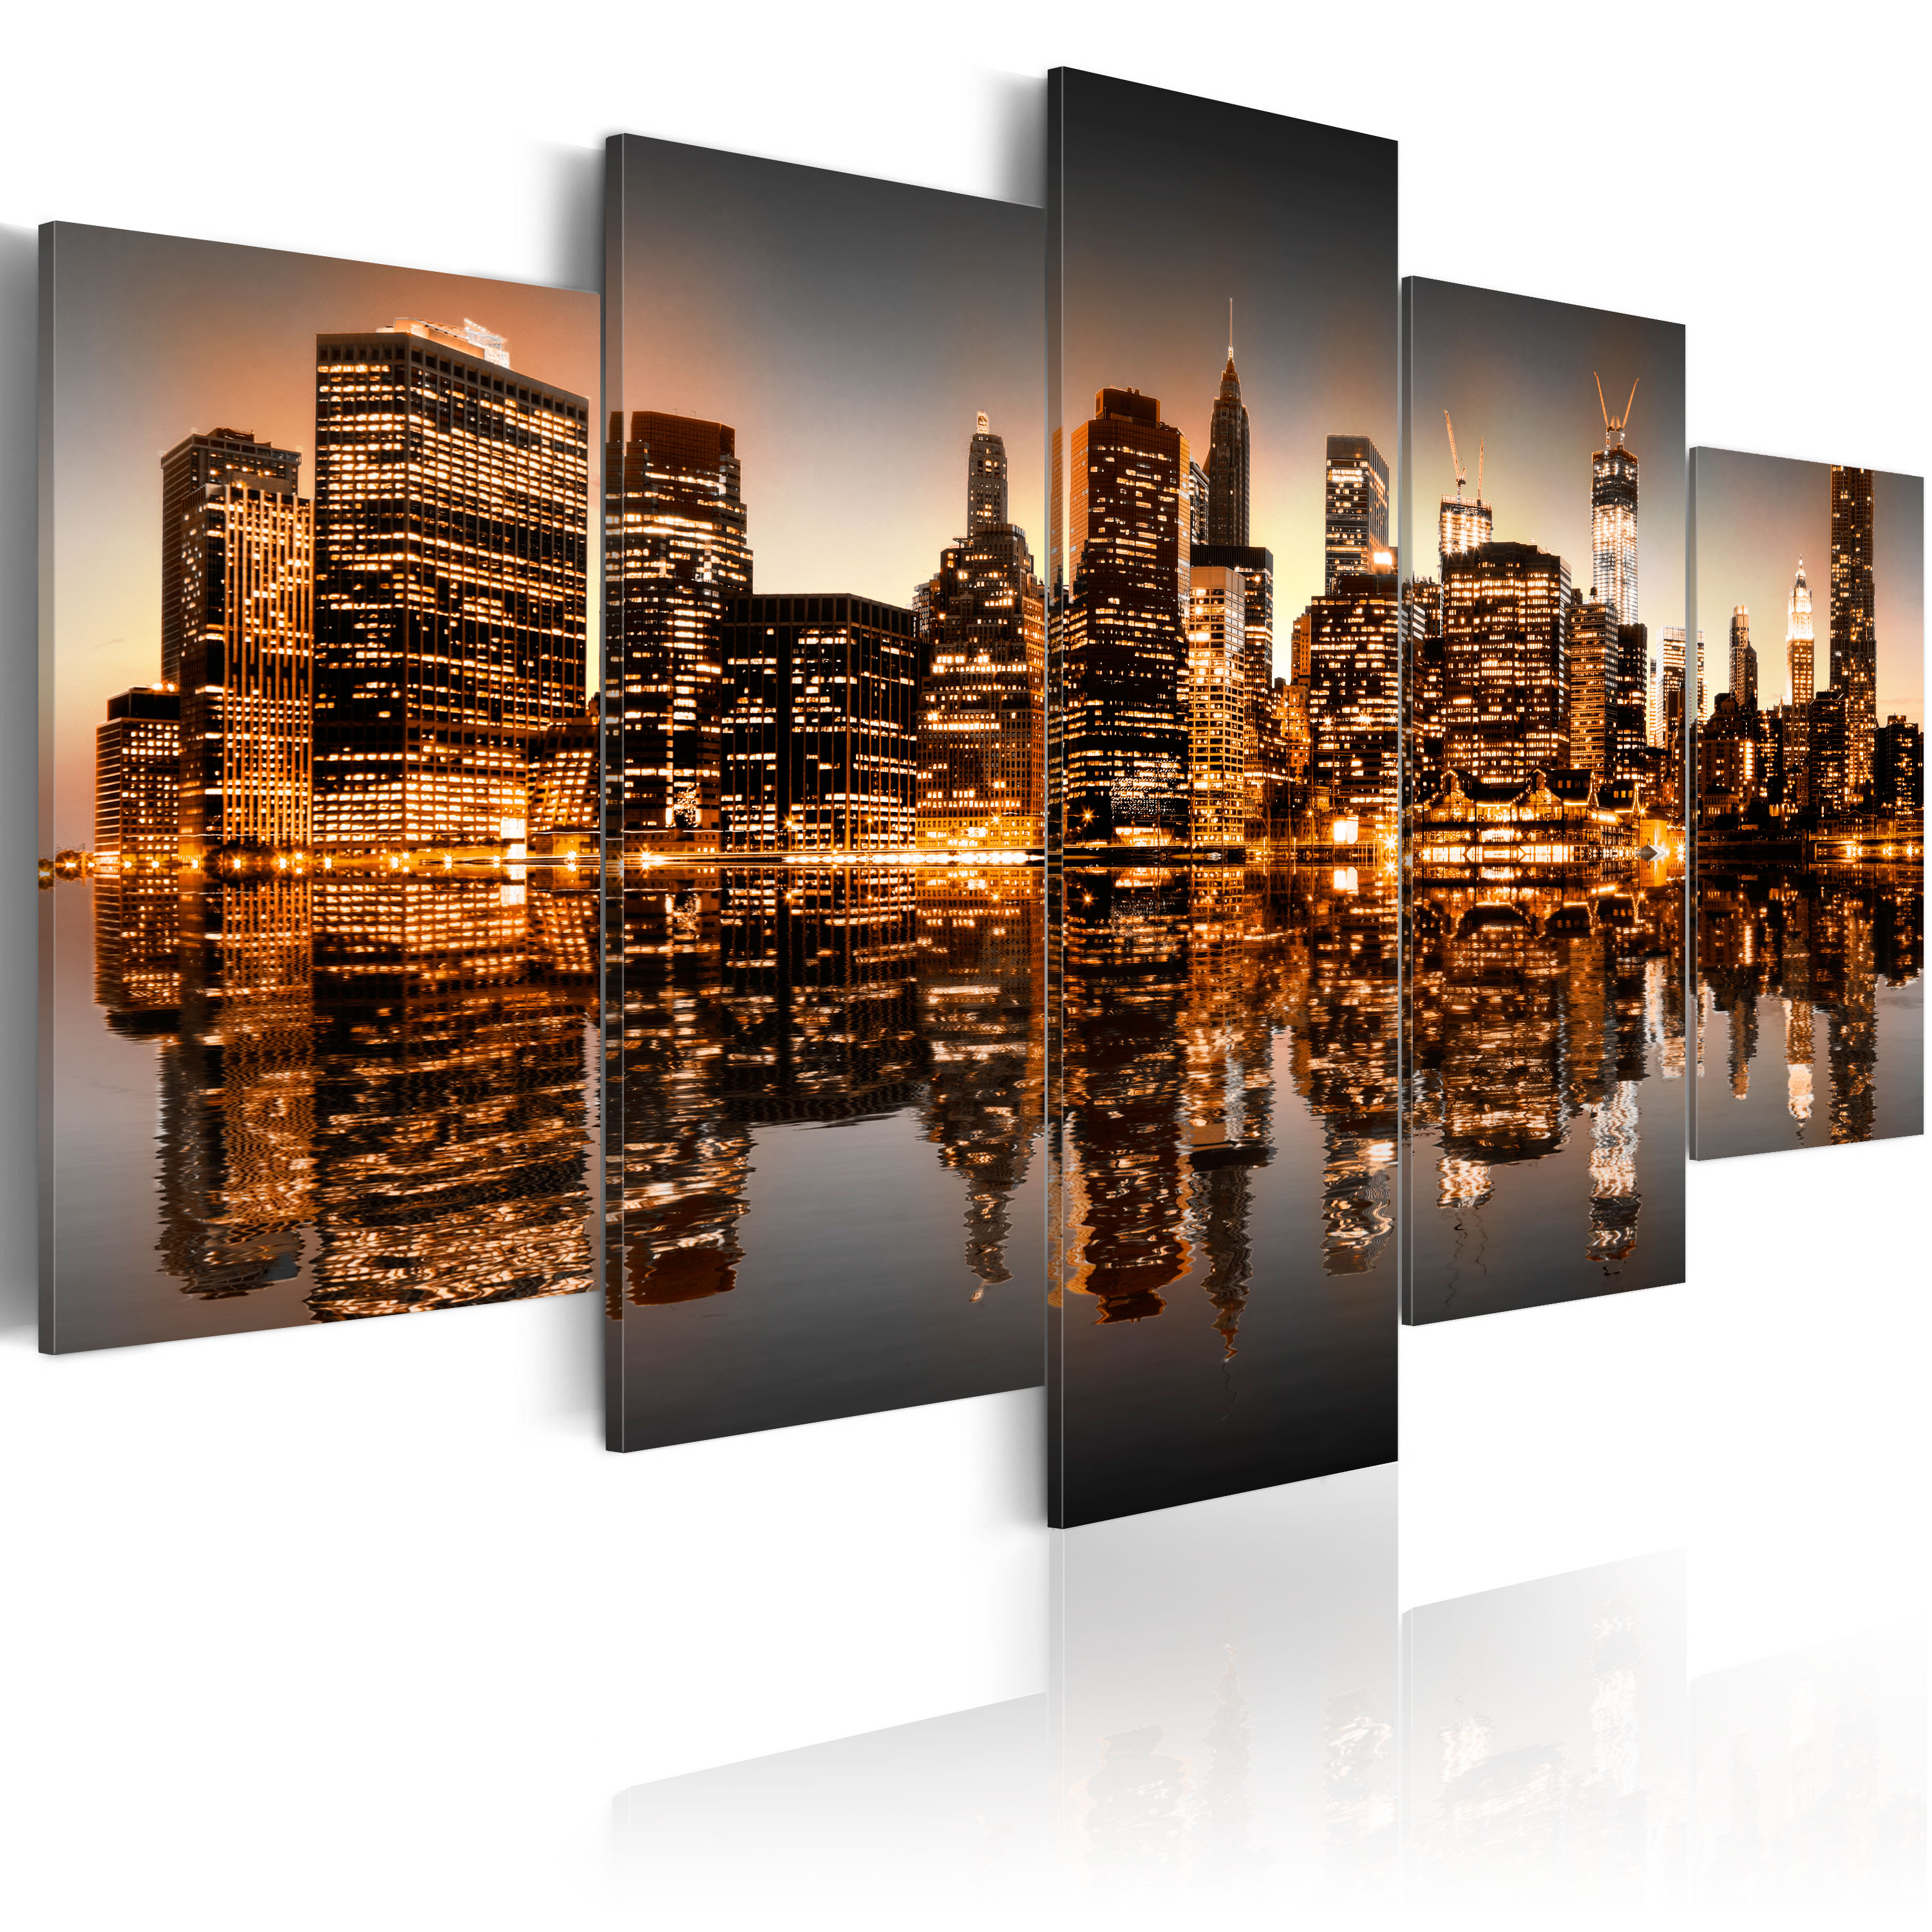 NEW YORK Canvas Print Framed Wall Art Picture Photo Image d-B-0154-b-a